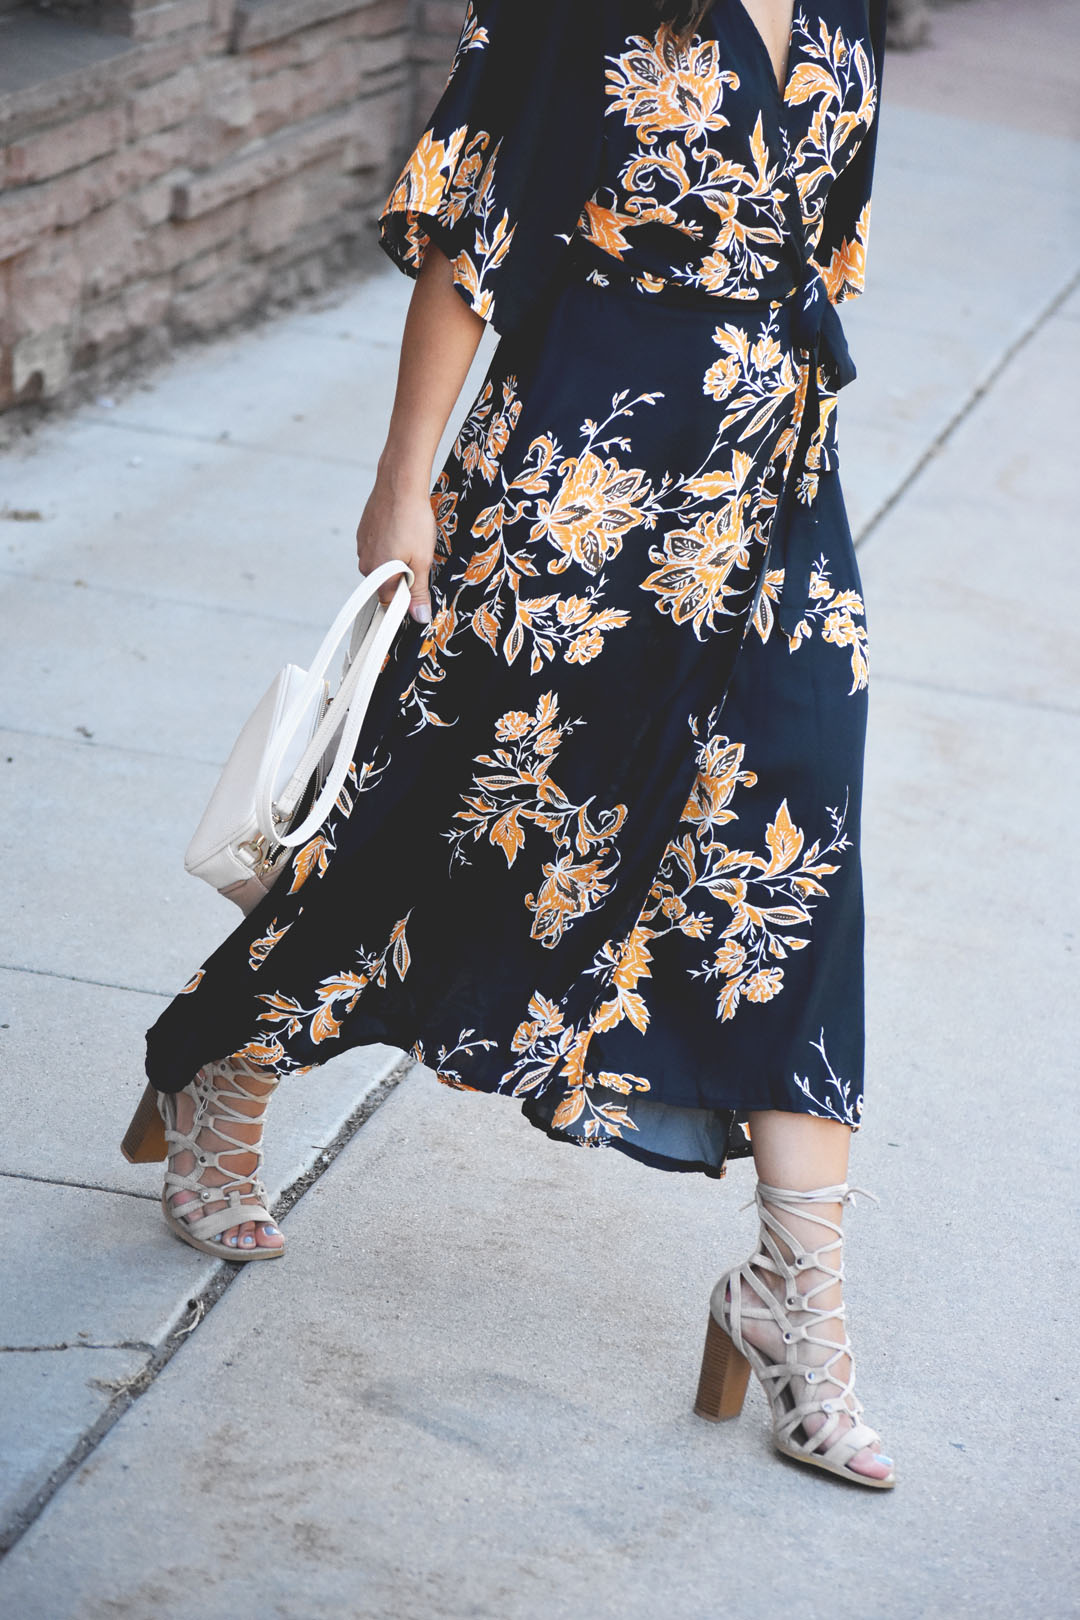 SheIn summer floral wrap dress and Lasula beige lace up sandals